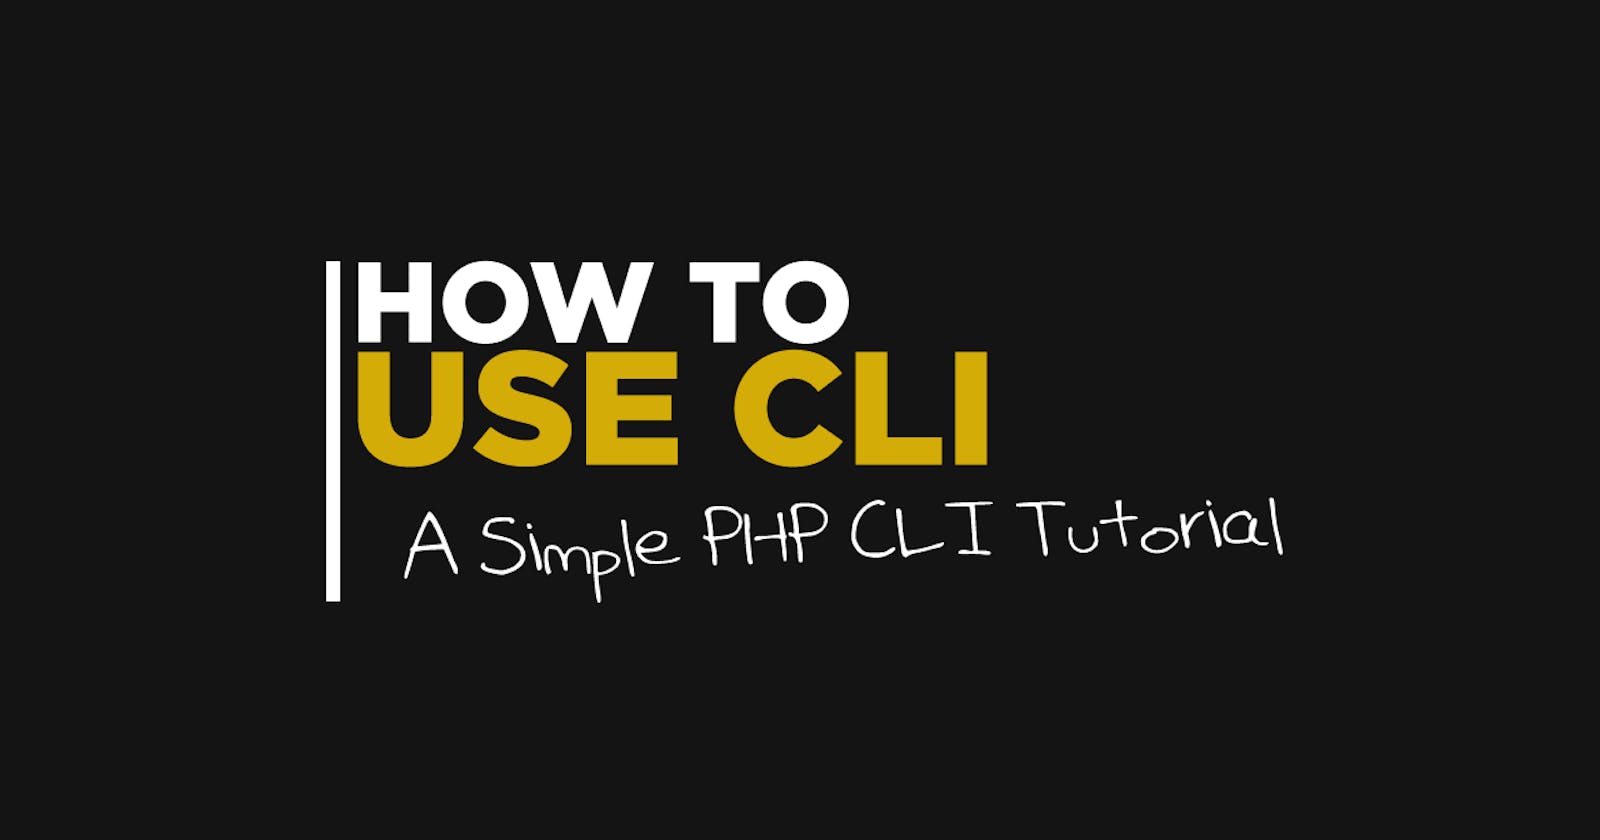 PHP CLI Development Introduction